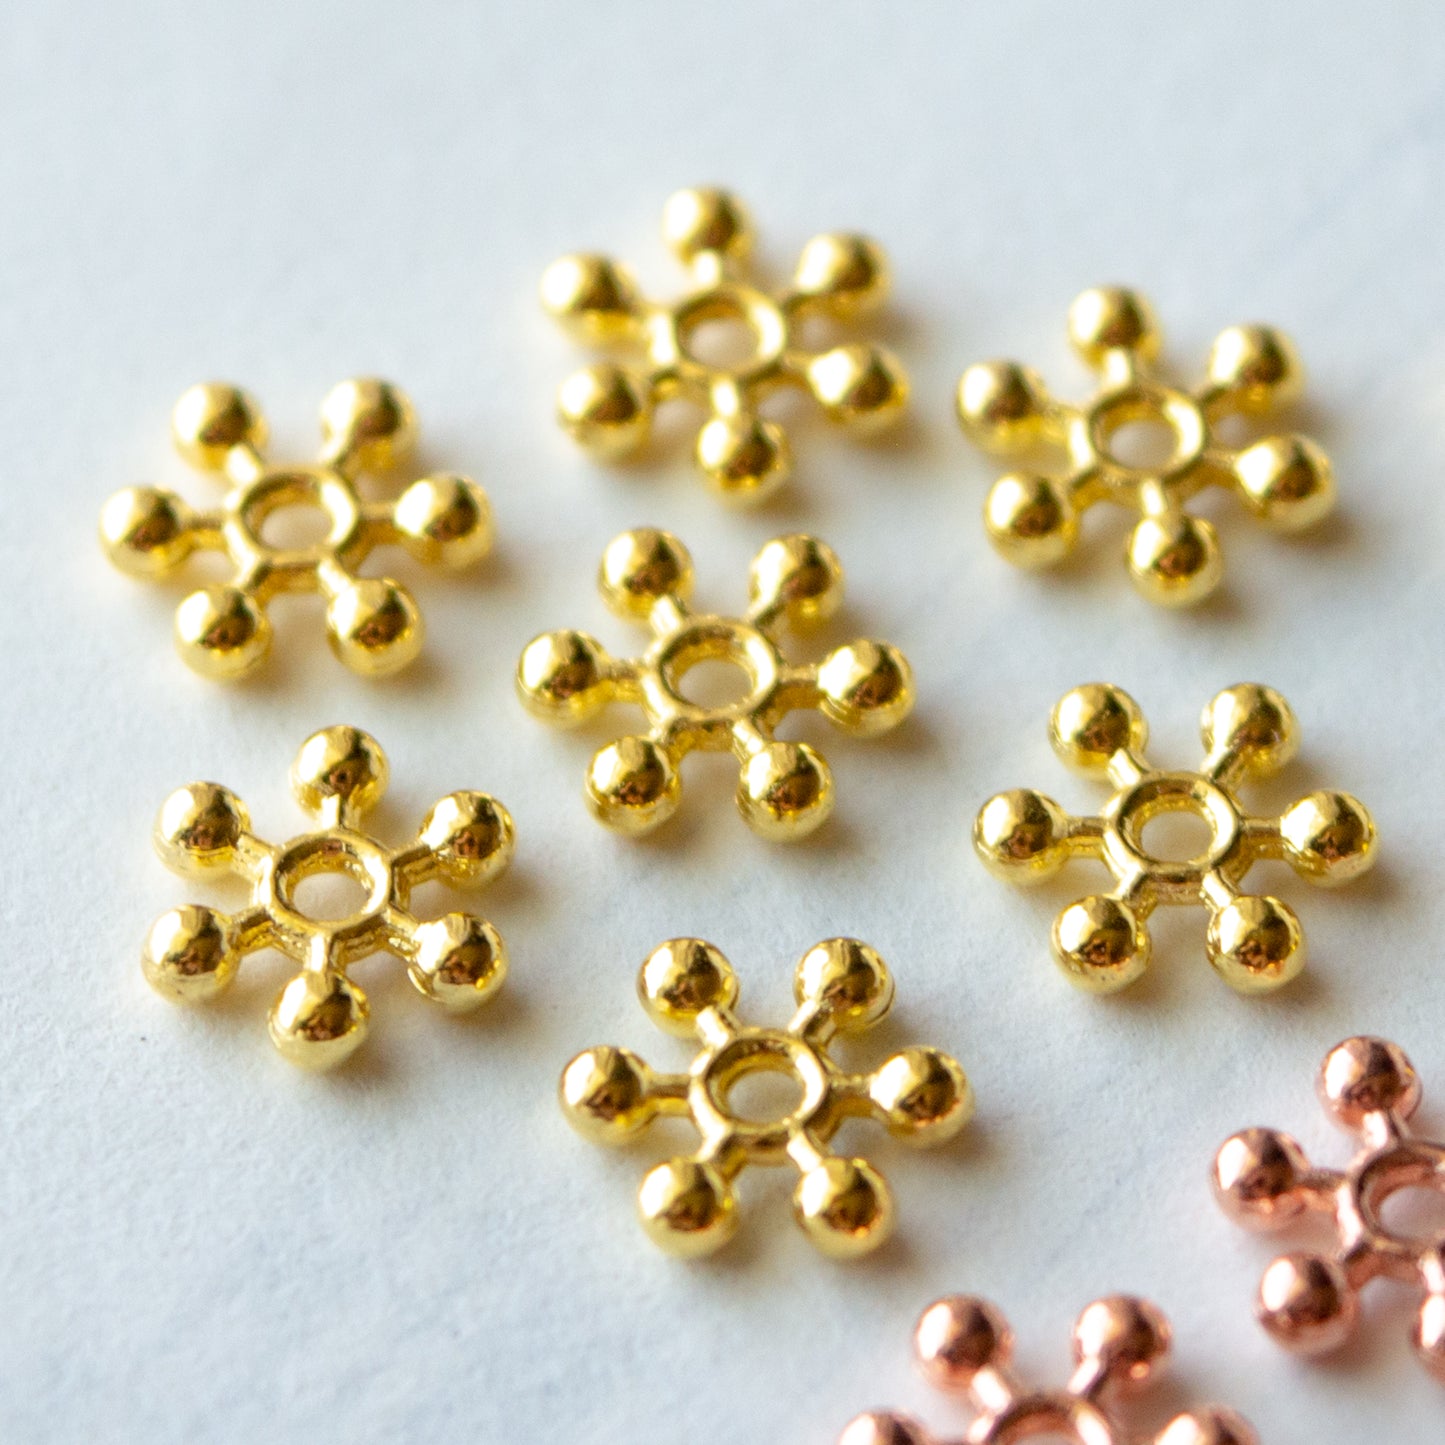 7.5mm Snowflake Spacer Beads in Multiple Colors of Metal Alloy